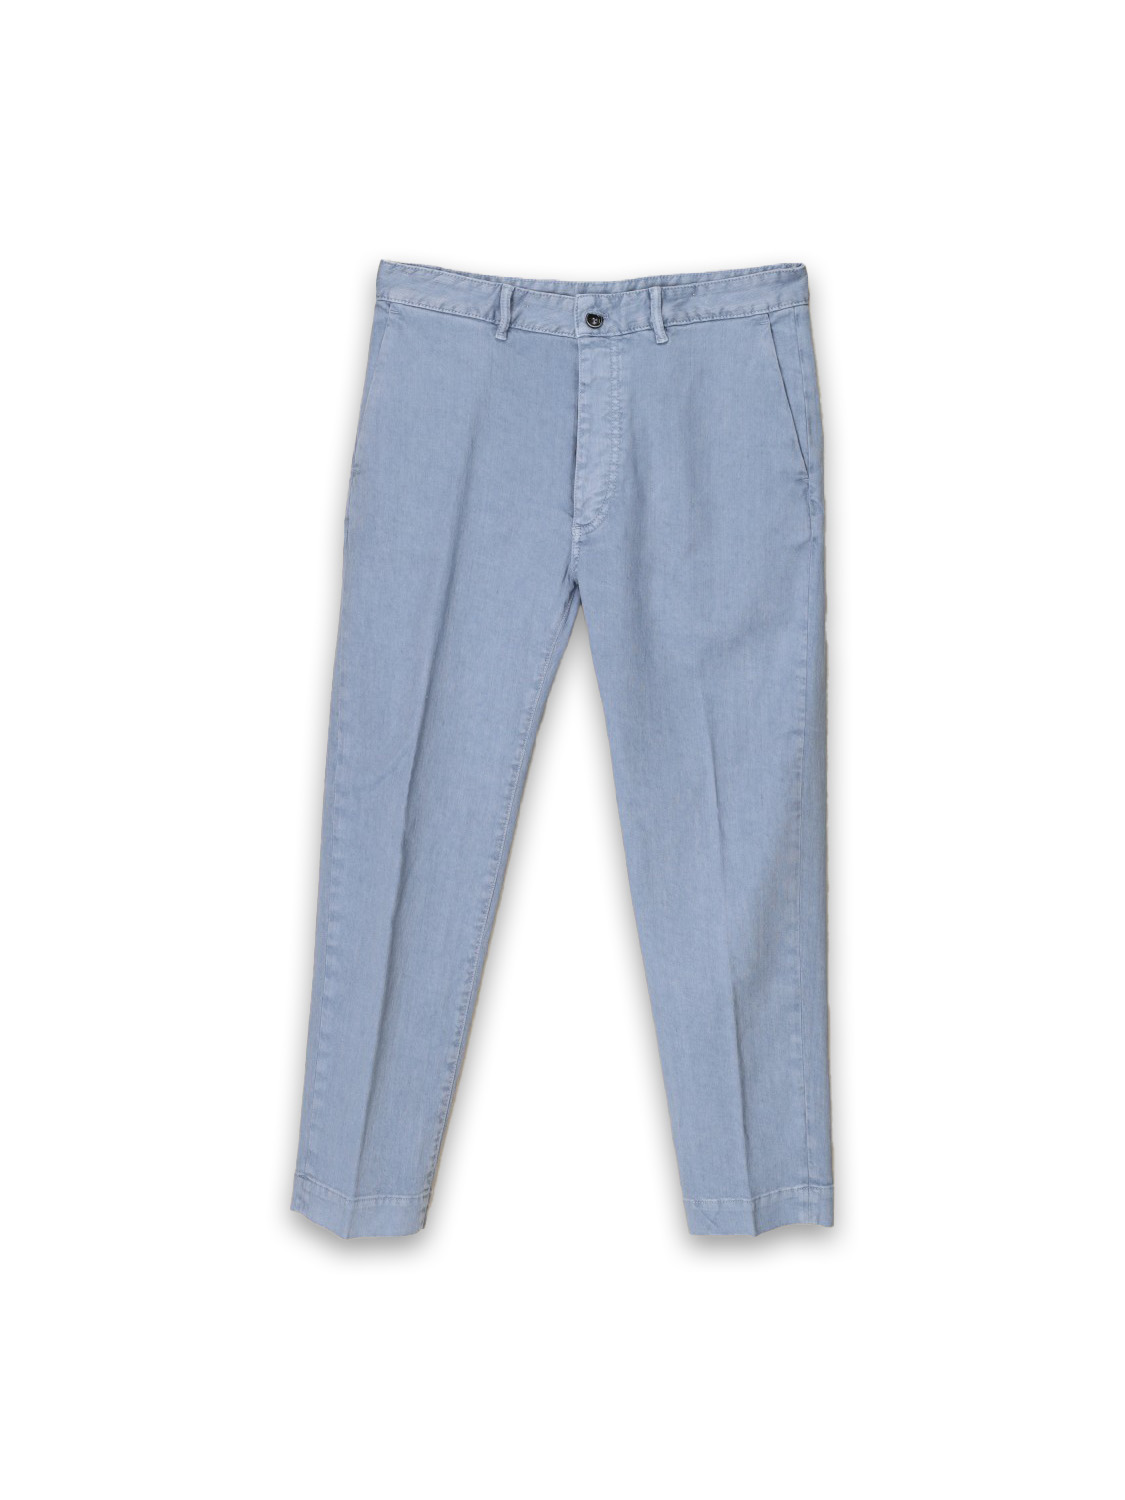 nine in the morning Tim – Stretchy linen-cotton mix jeans  hellblau 31